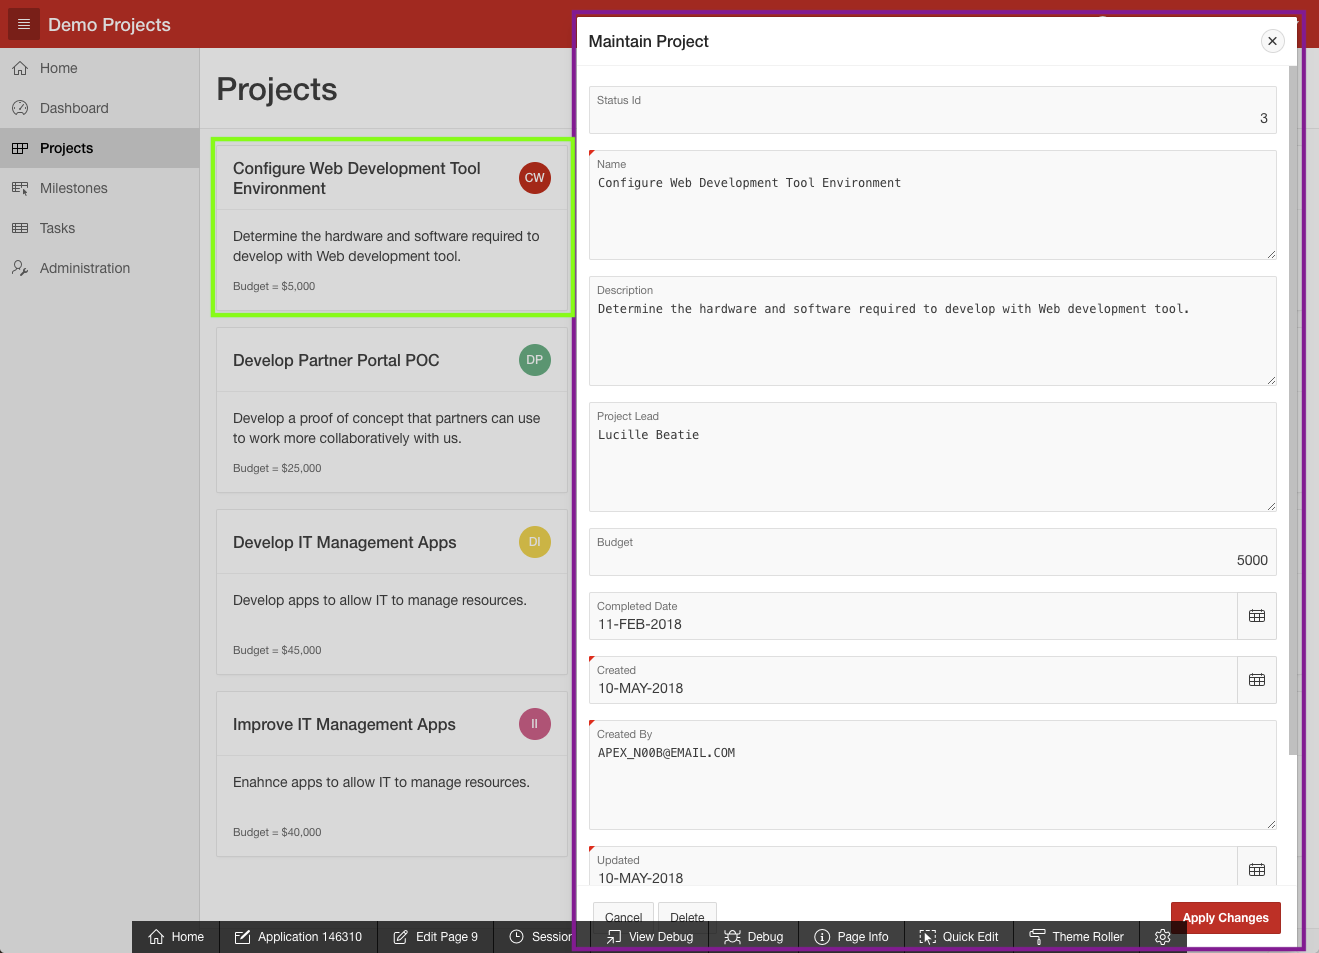 View of the Maintain Project page